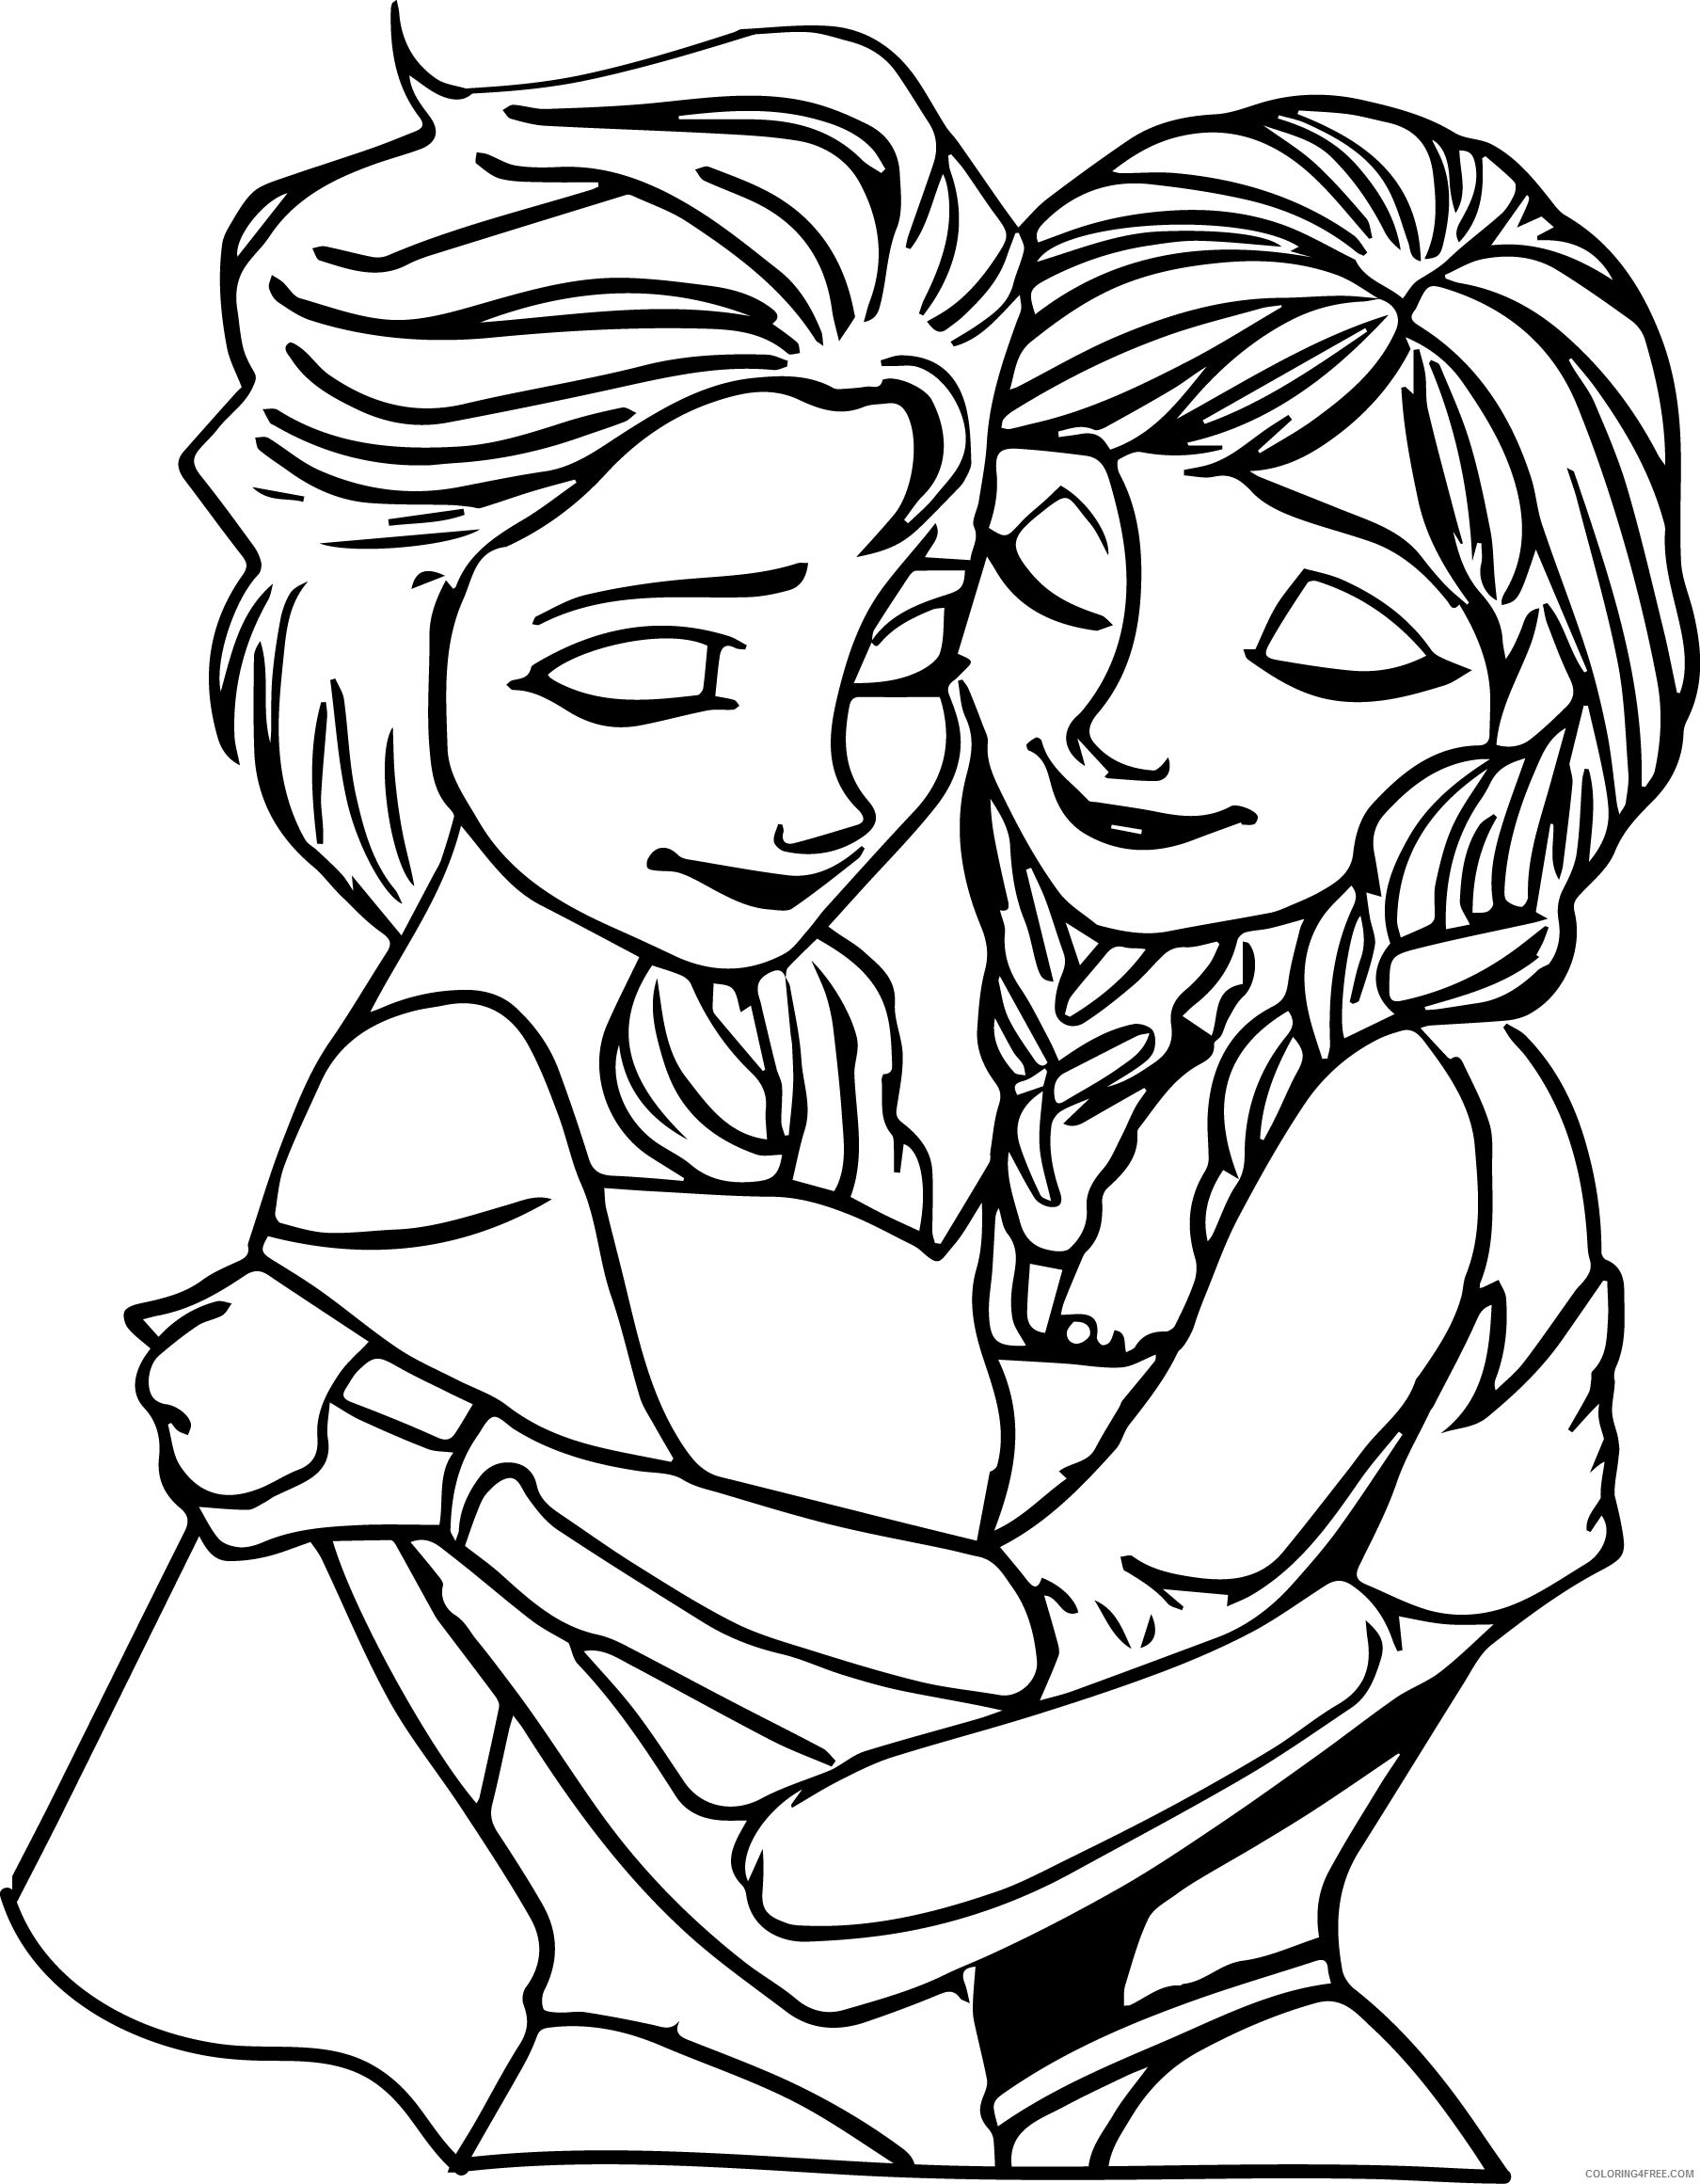 elsa-and-anna-hugging-coloring-page-coloring4free-coloring-home